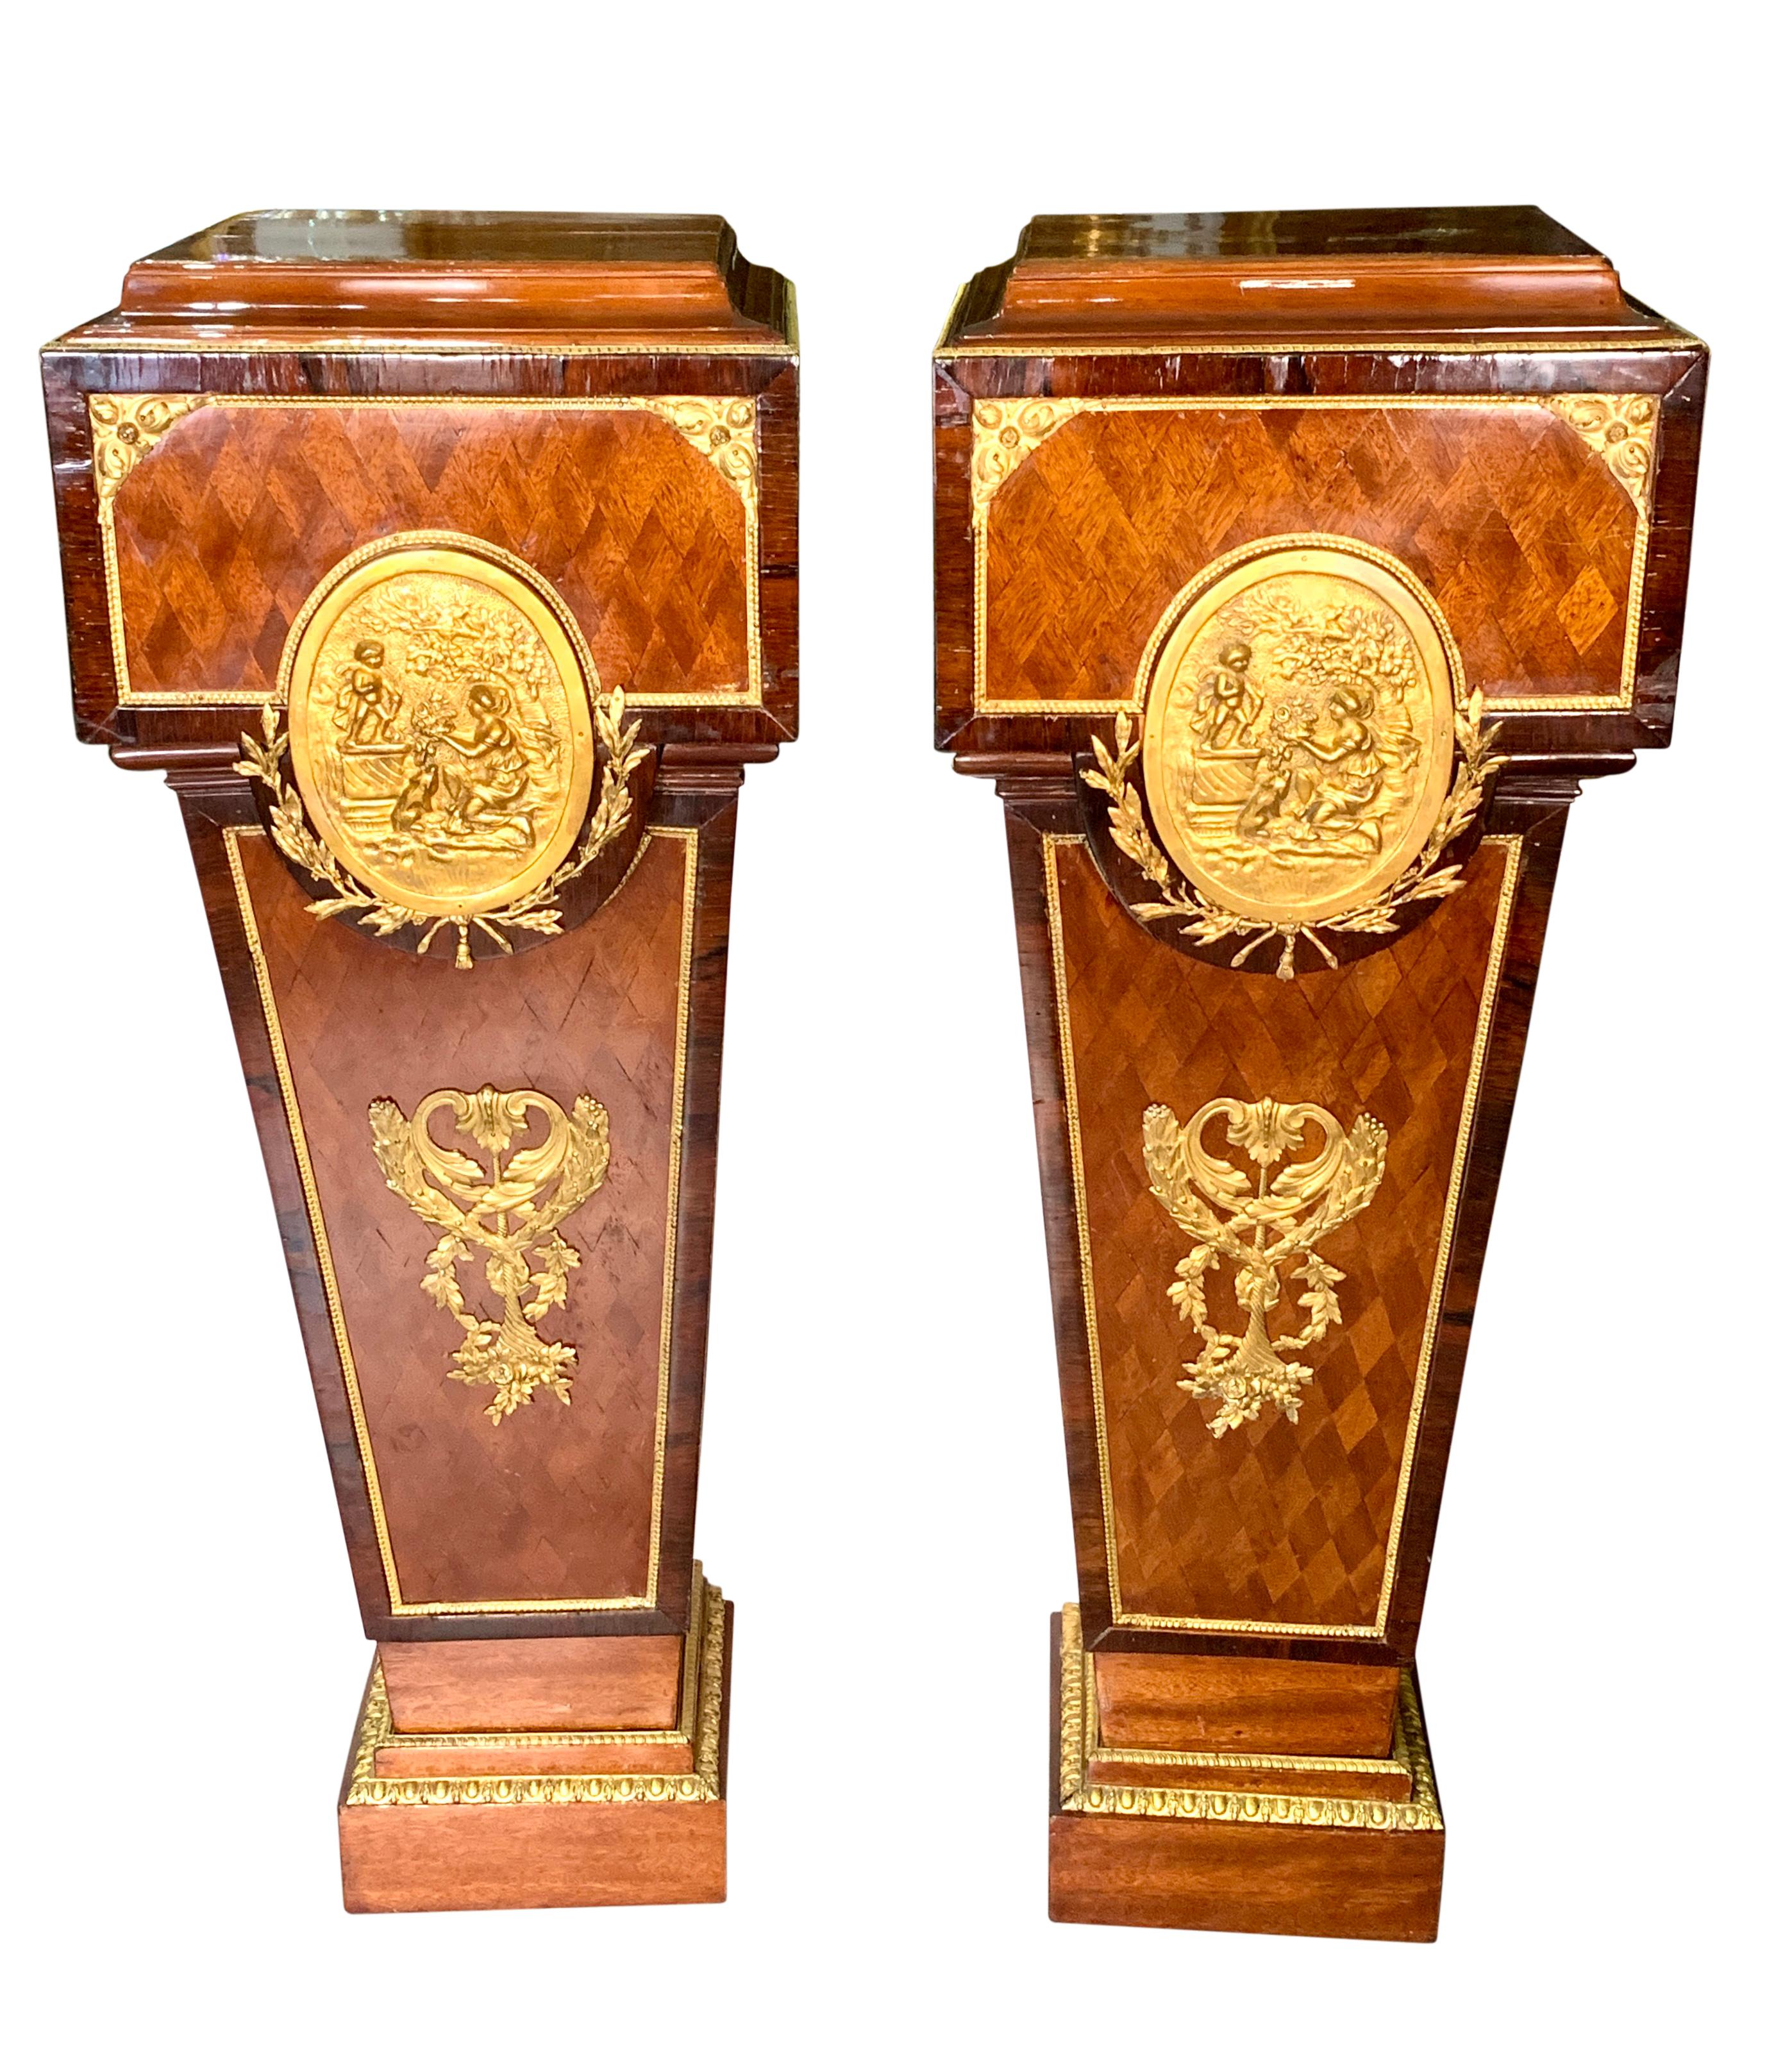 An elegant pair of early 20th century French Louis XVI style gilt bronze mounted pedestals. Constructed in parquetry wood with gilt bronze mounts, rising from stepped rectangular plinths, with a central oval gilt bronze plaque depicting a lady